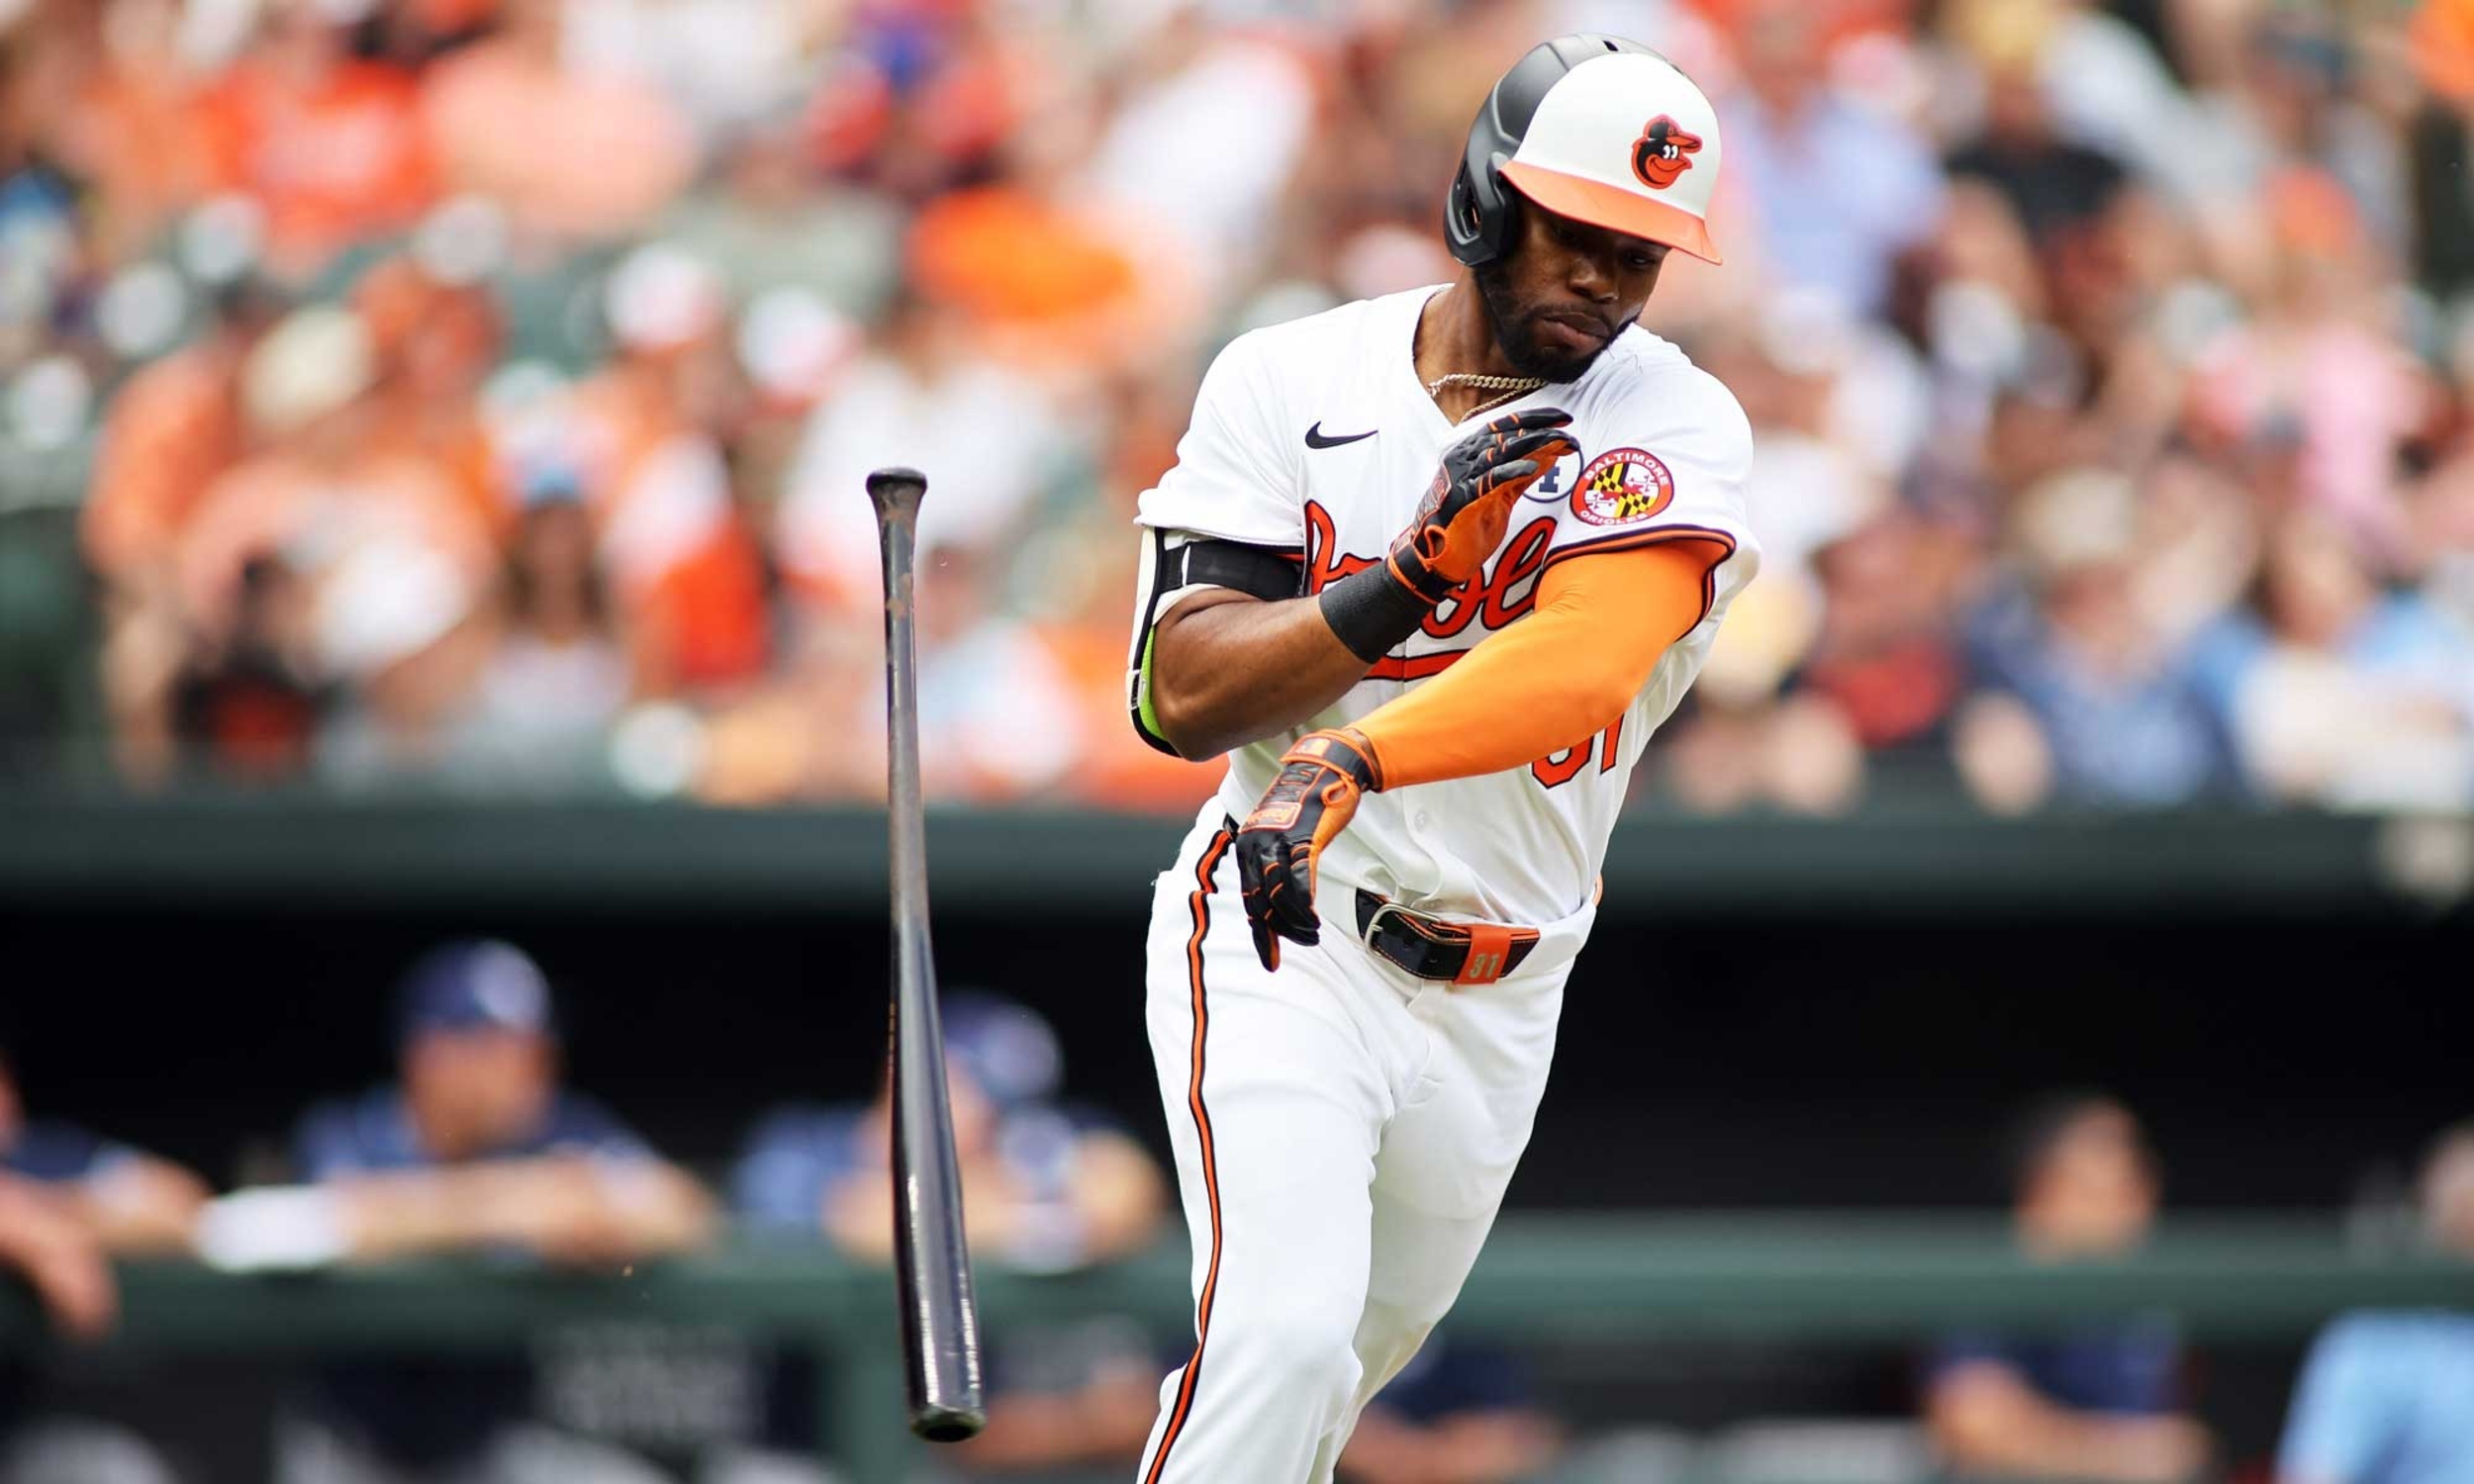 <p>Mullins struggled last season, a decline that was blamed on injury. However, he's performed even worse this year and is beginning to lose playing time with a .527 OPS in 56 games.</p><p>You may also like: <a href='https://www.yardbarker.com/mlb/articles/small_ball_famous_little_league_world_series_alumni/s1__22679773'>Small ball: Famous Little League World Series alumni</a></p>